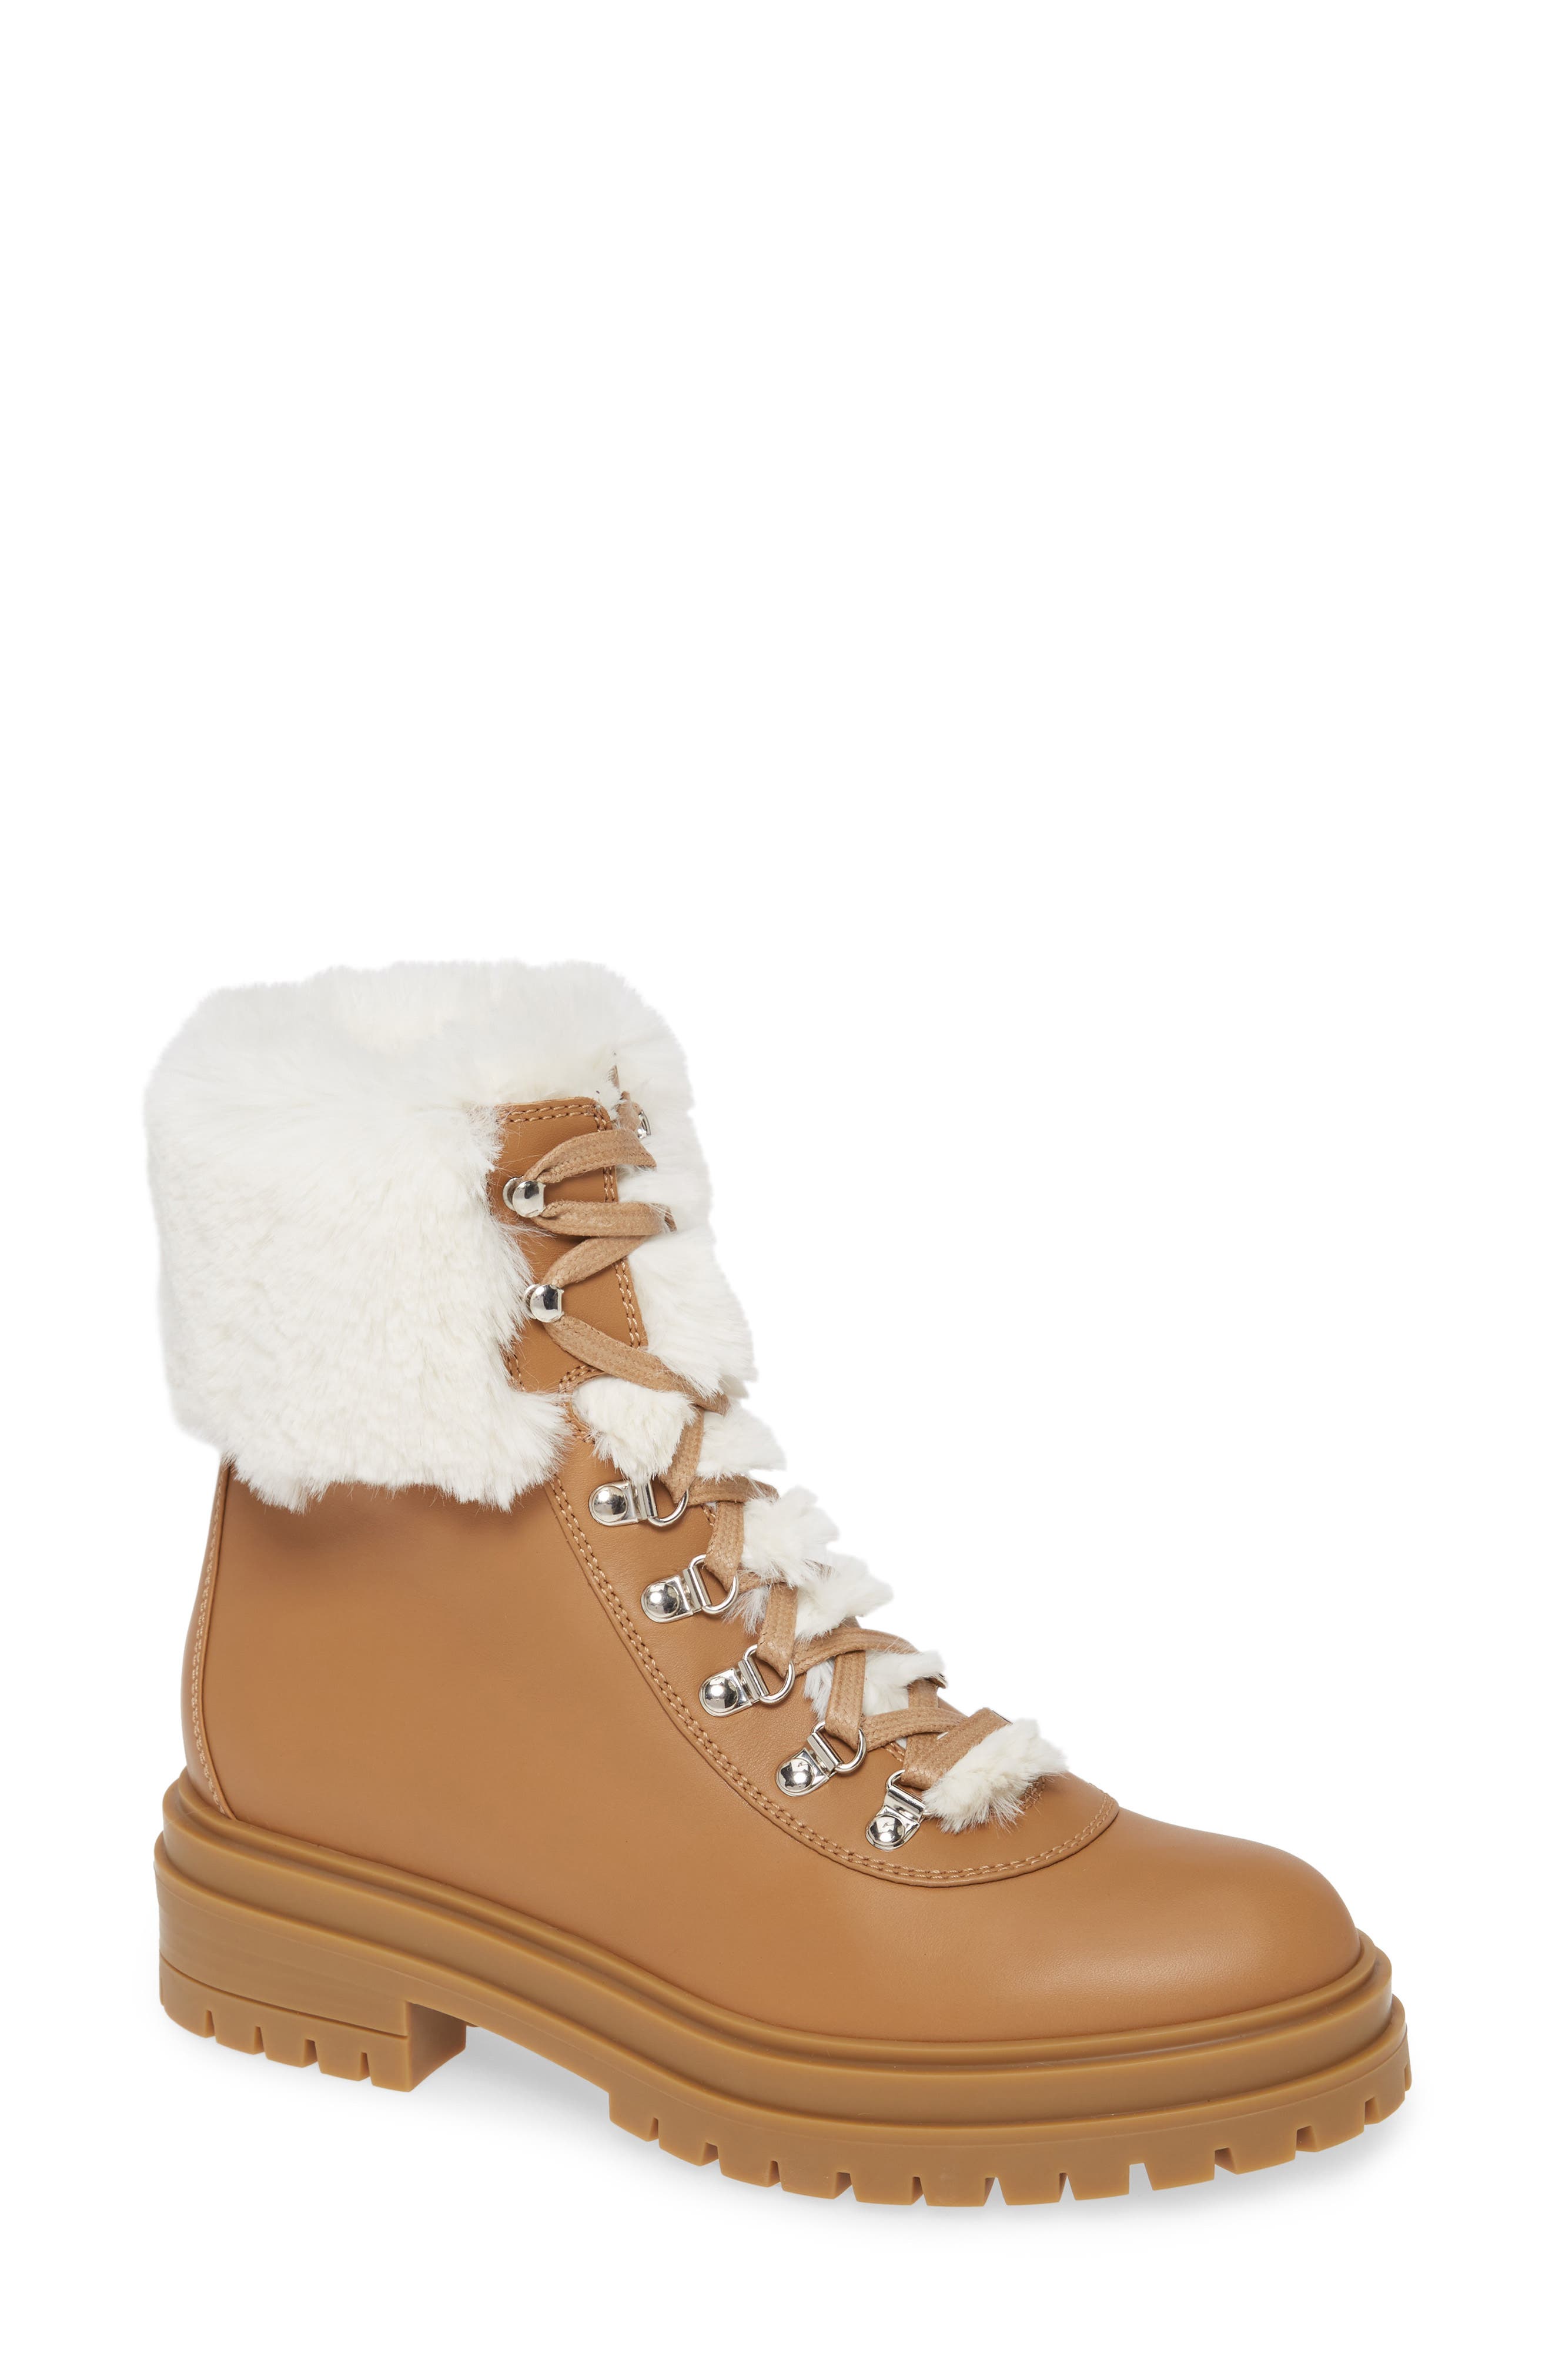 combat boots with fur